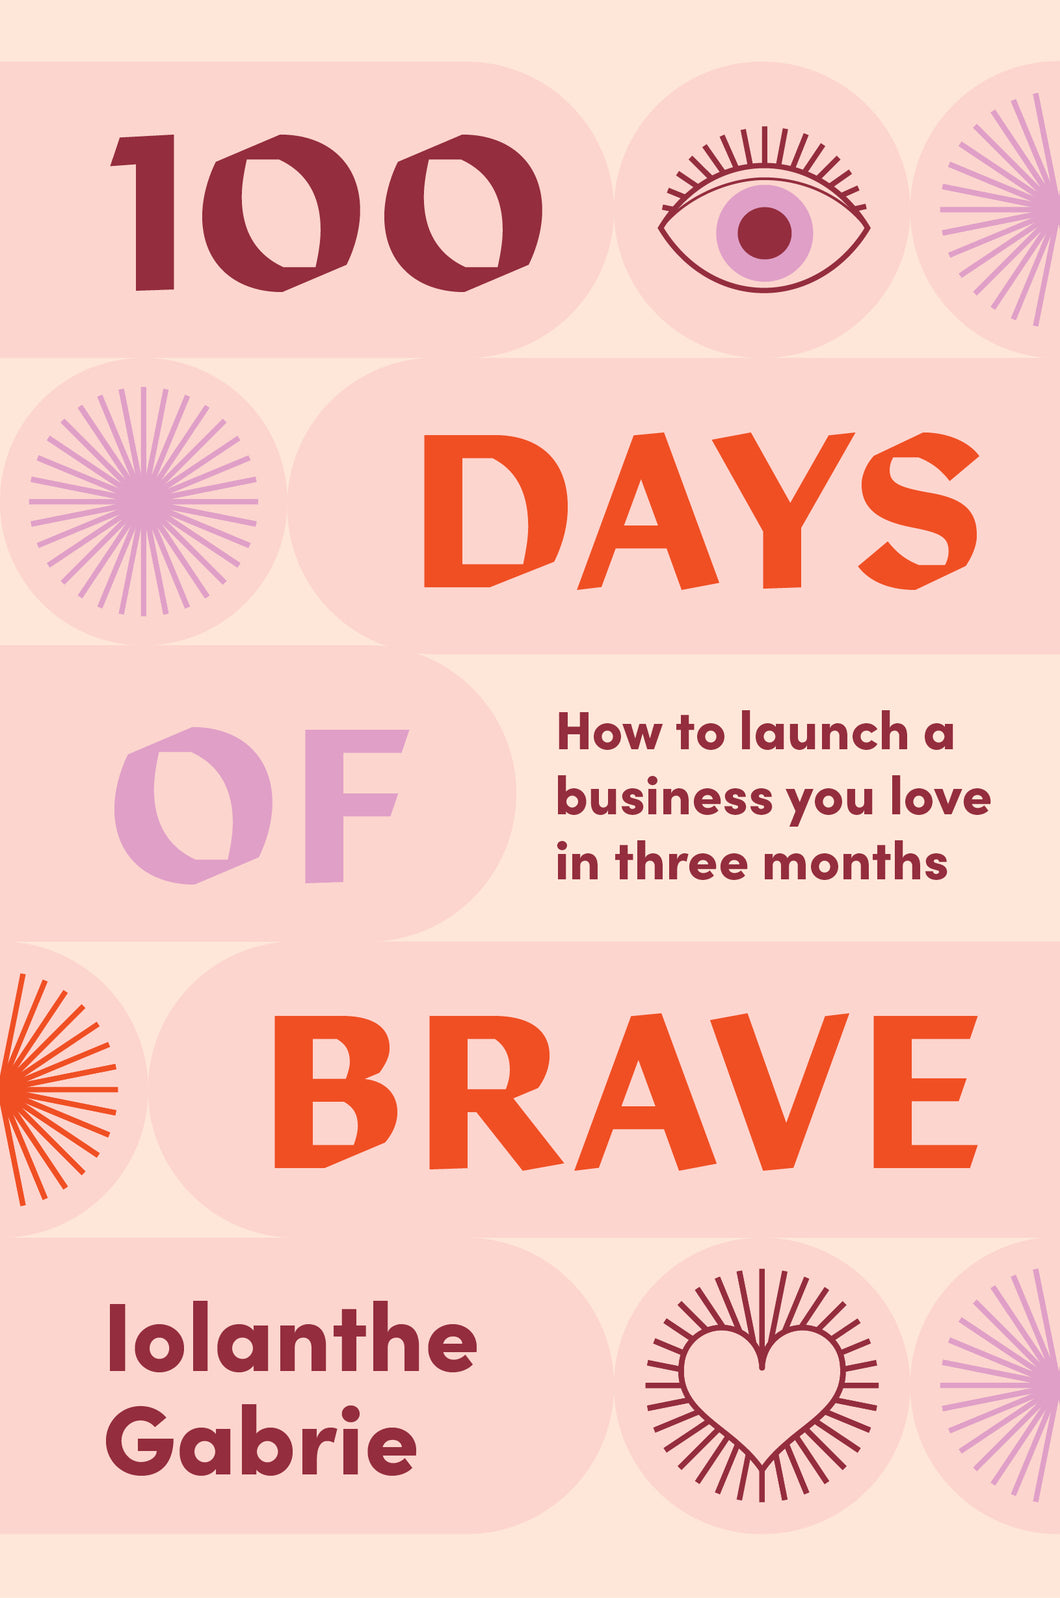 100 Days of Brave: How to launch a business you love in three months <br><i><small> by Iolanthe Gabrie </i> </small>